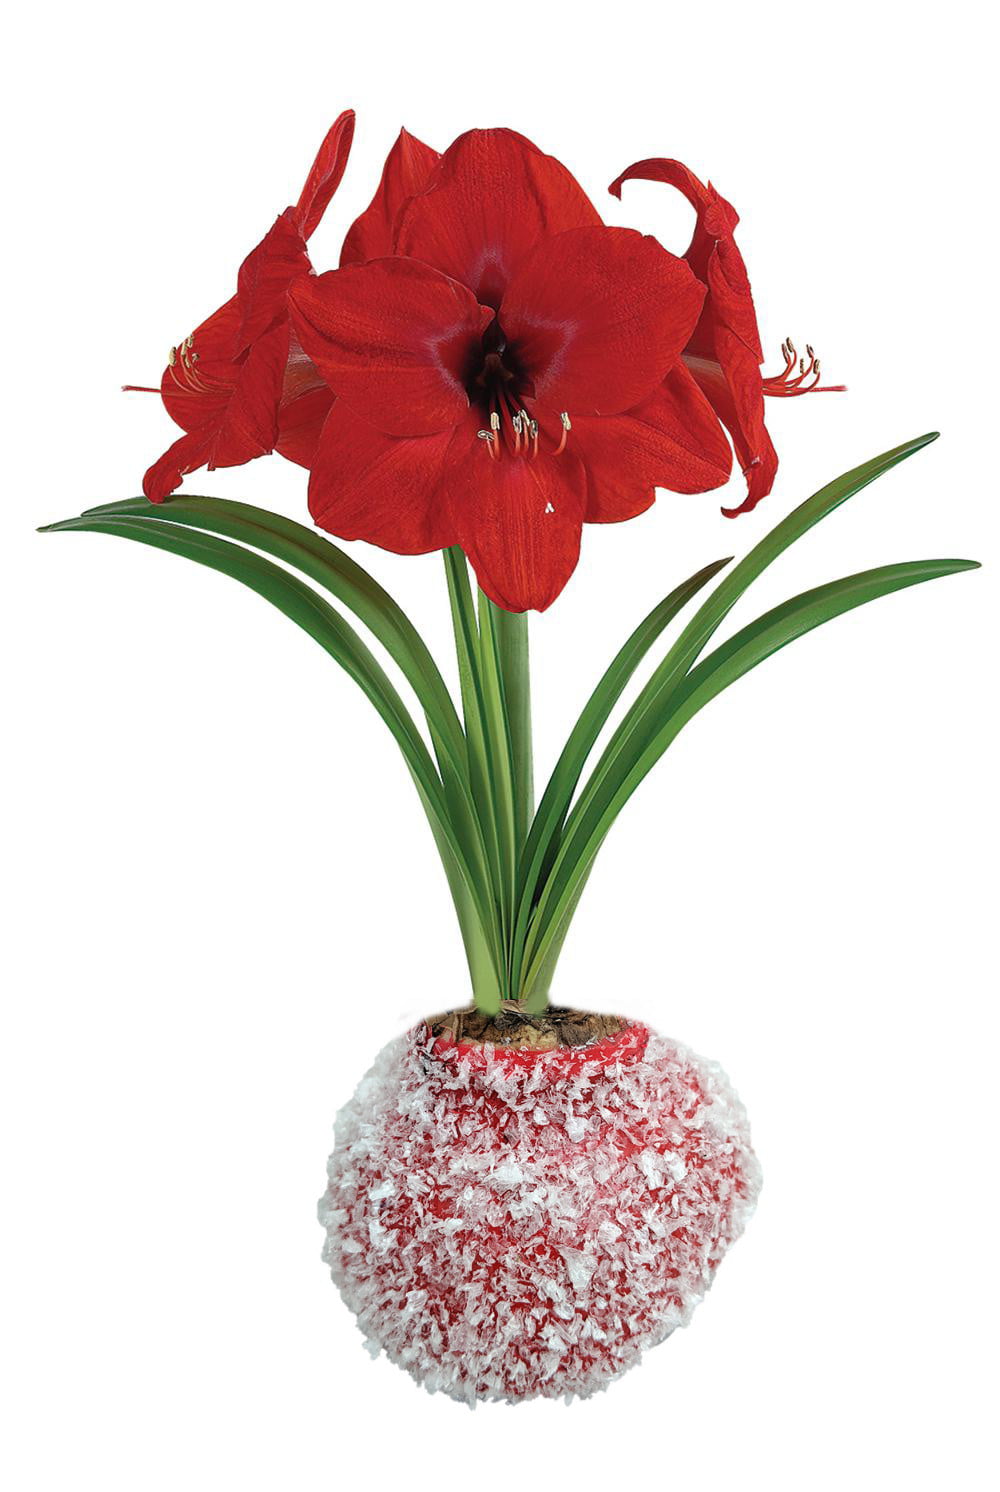 How To Care For Amaryllis Bulb In Wax Red Snow Glitter Waxed Amaryllis Bulb - Blooms Without Soil/Water -  Perennial - Walmart.com